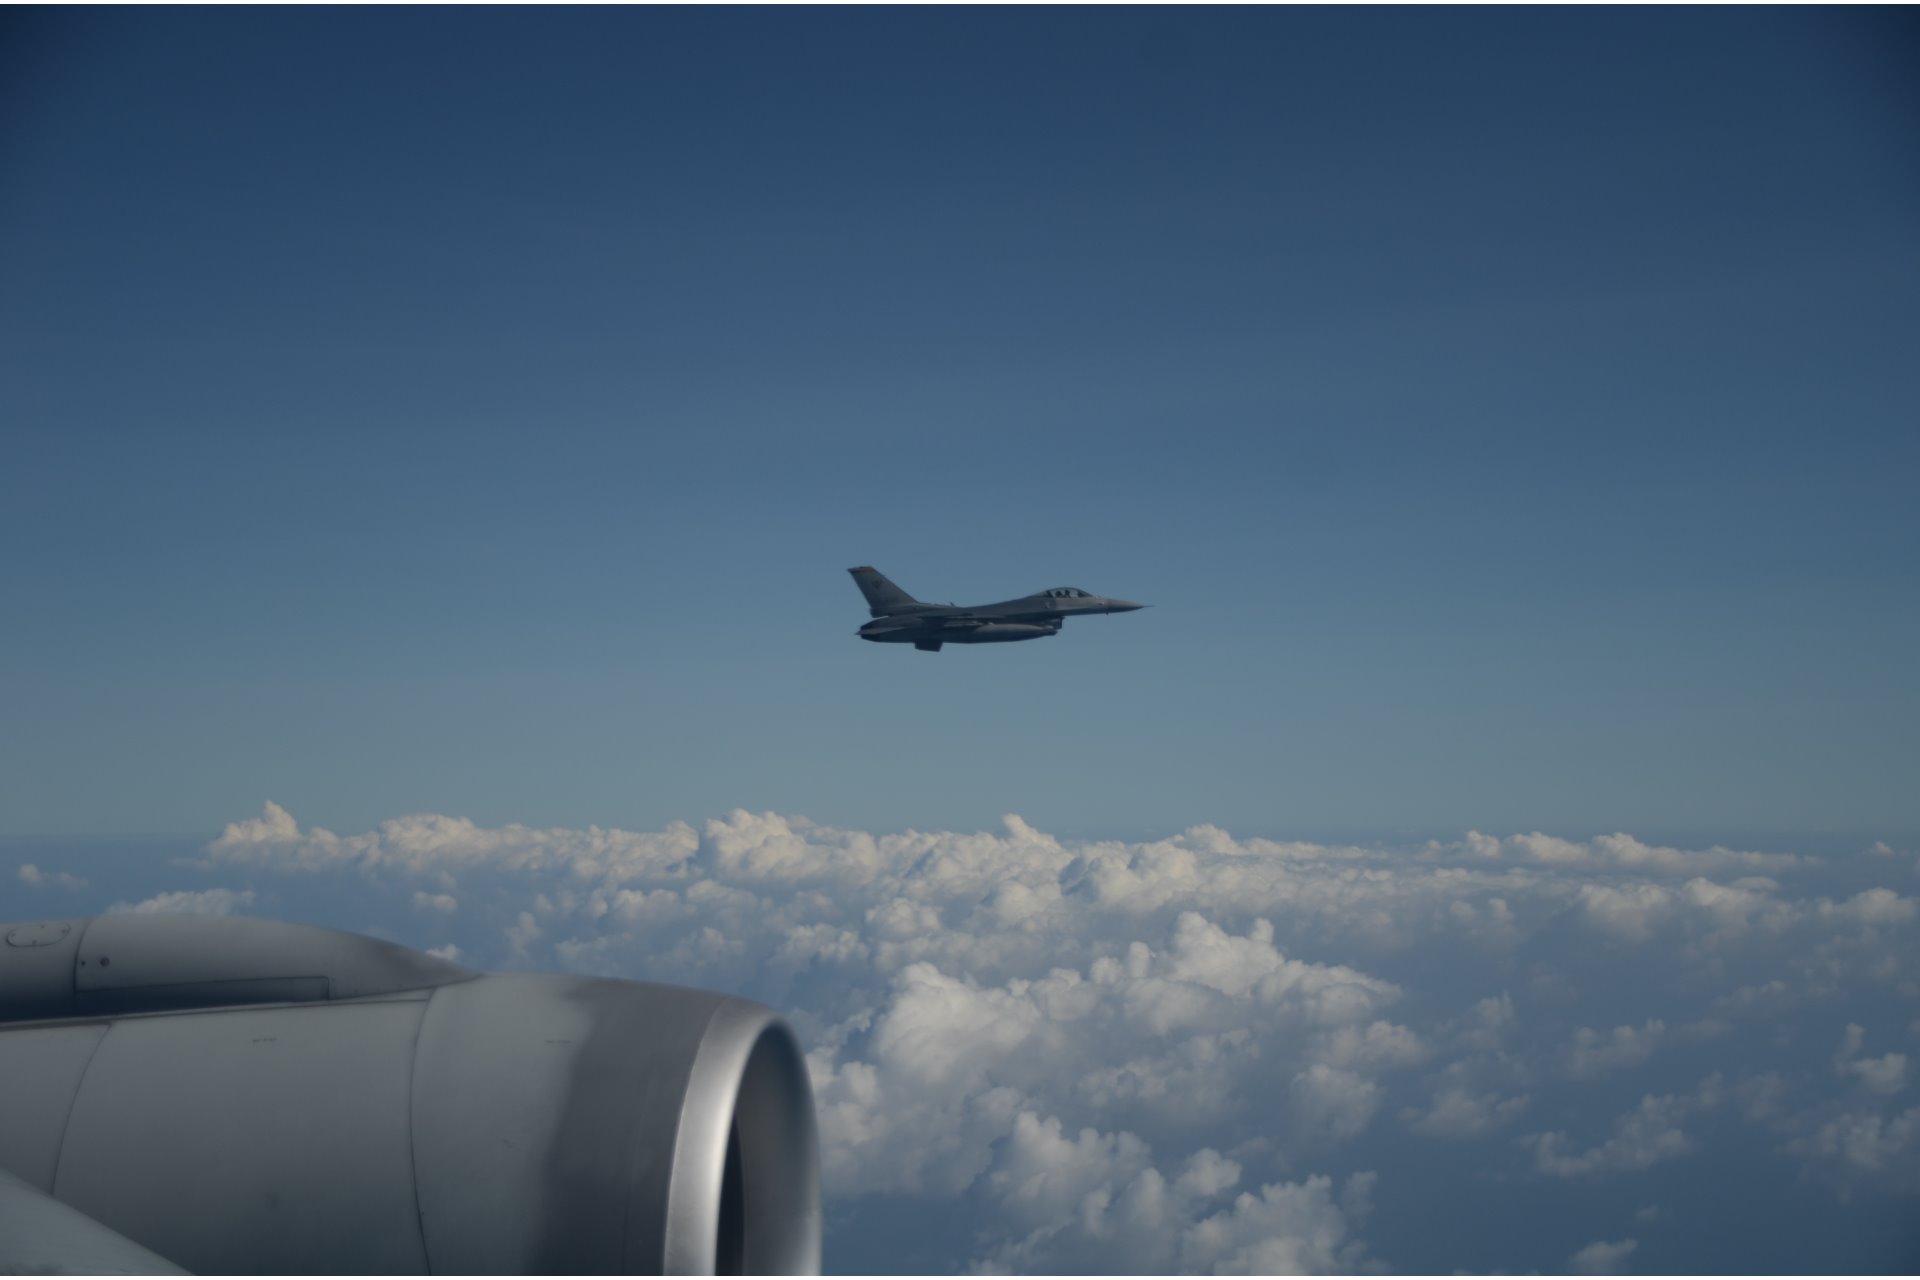 An RSAF F-16C fighter aircraft intercepting a simulated suspicious aircraft at the air defence exercise.